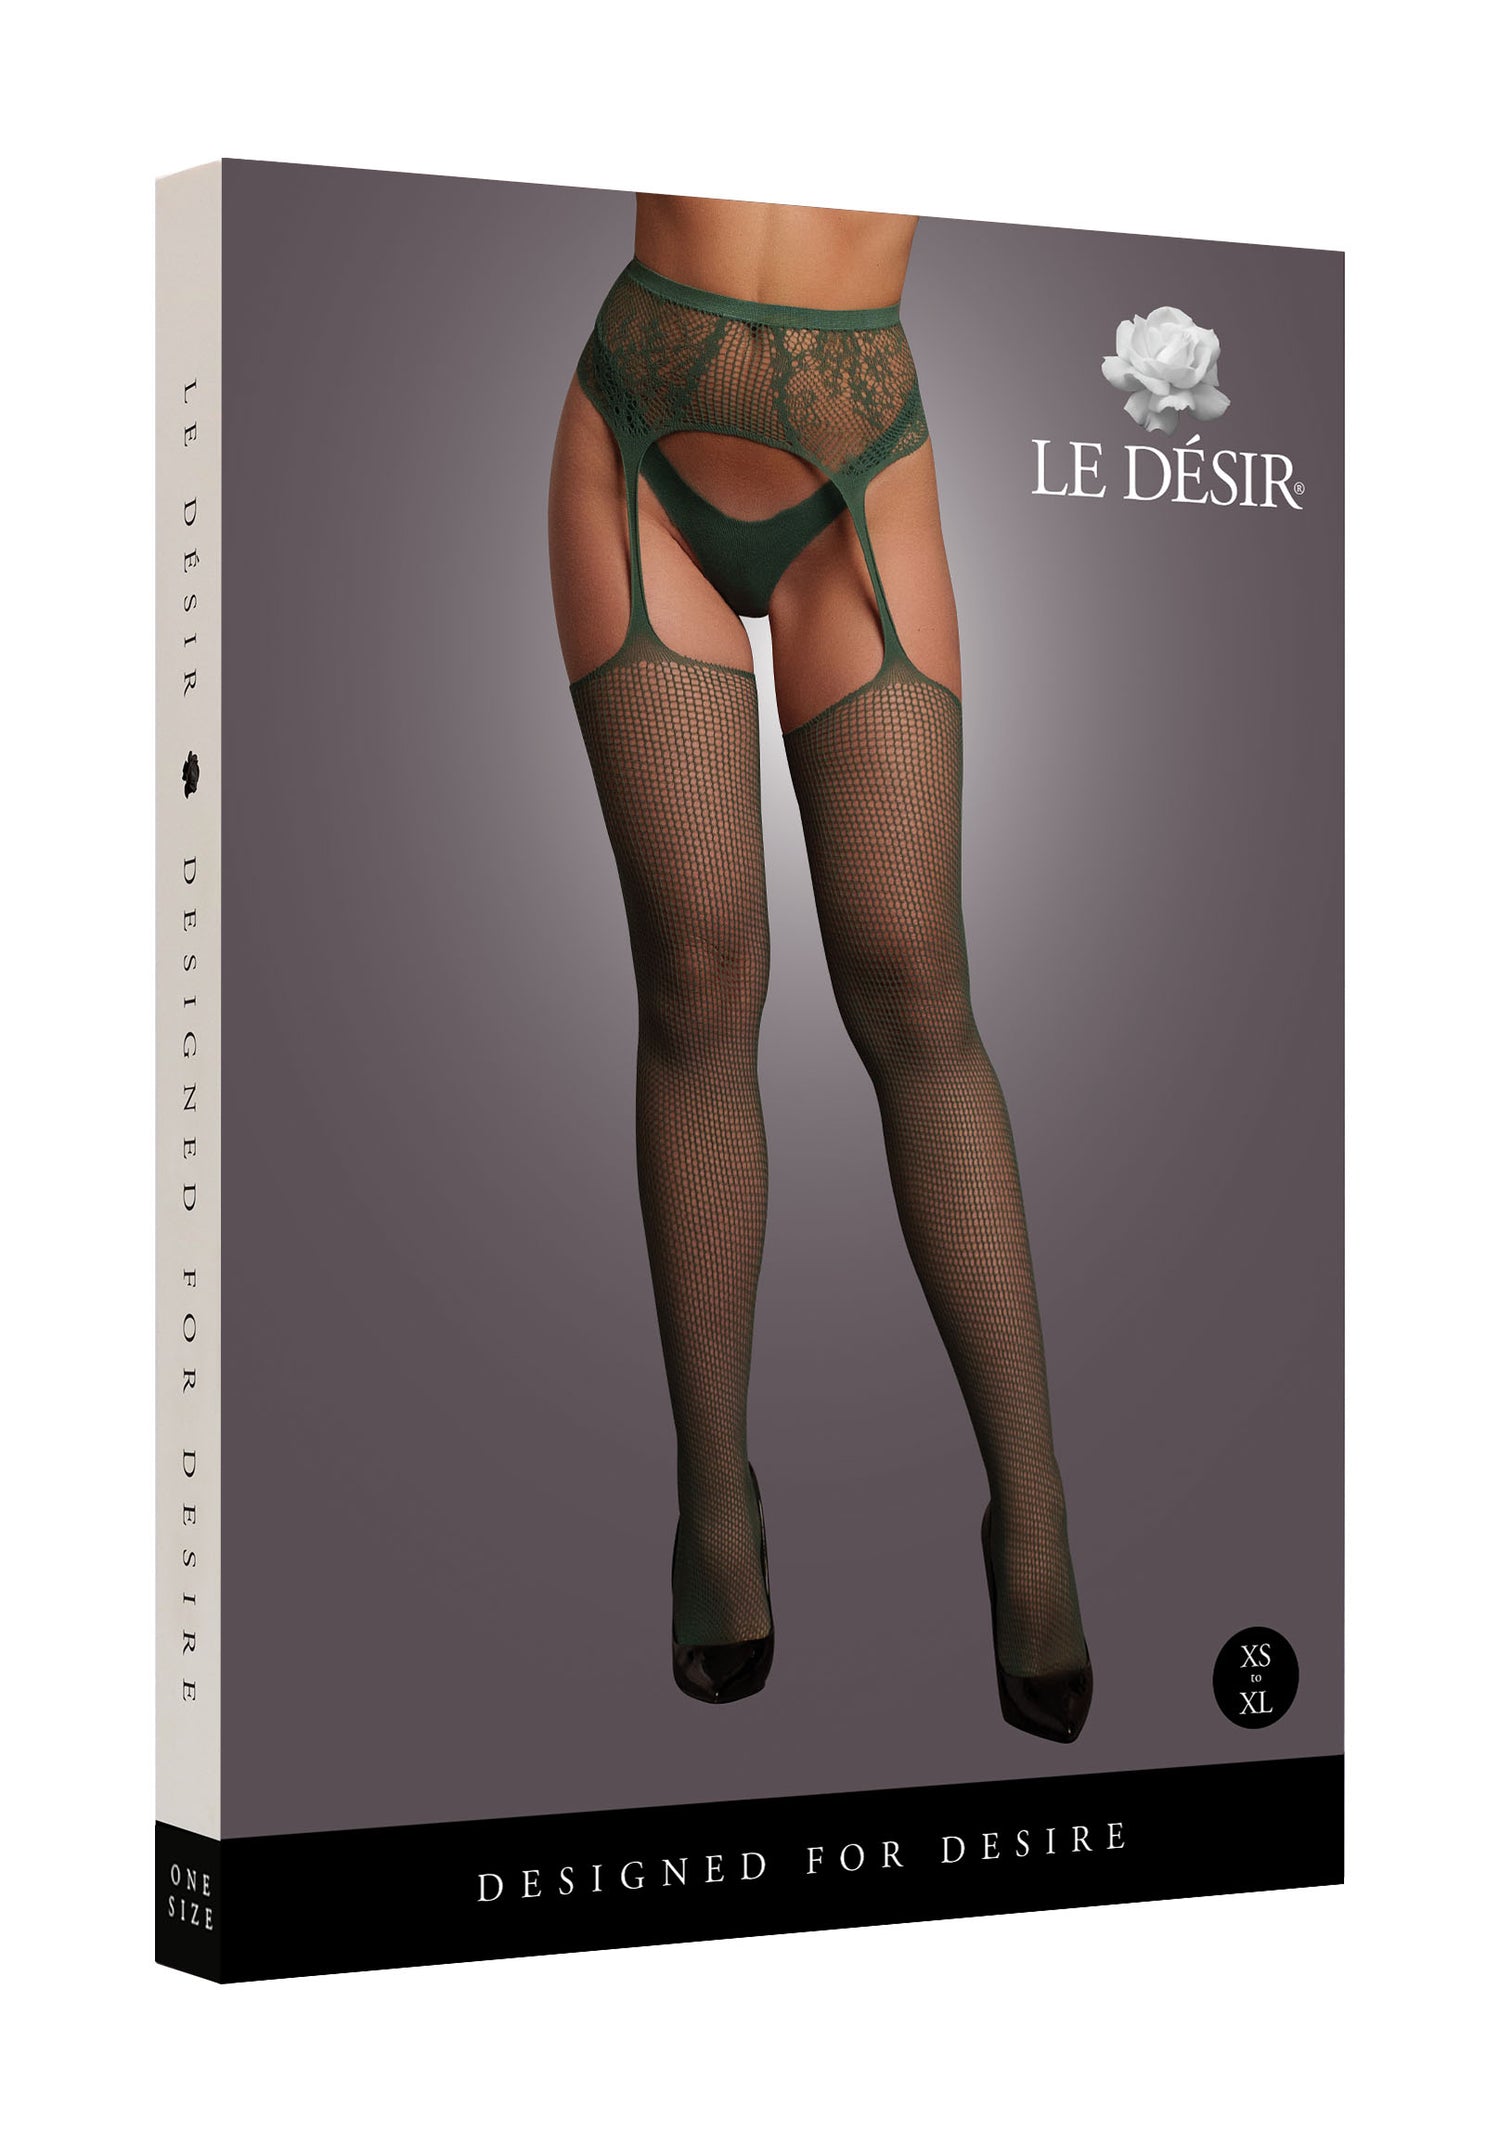 Le Désir Fishnet and Lace Garterbelt Stockings - One Size